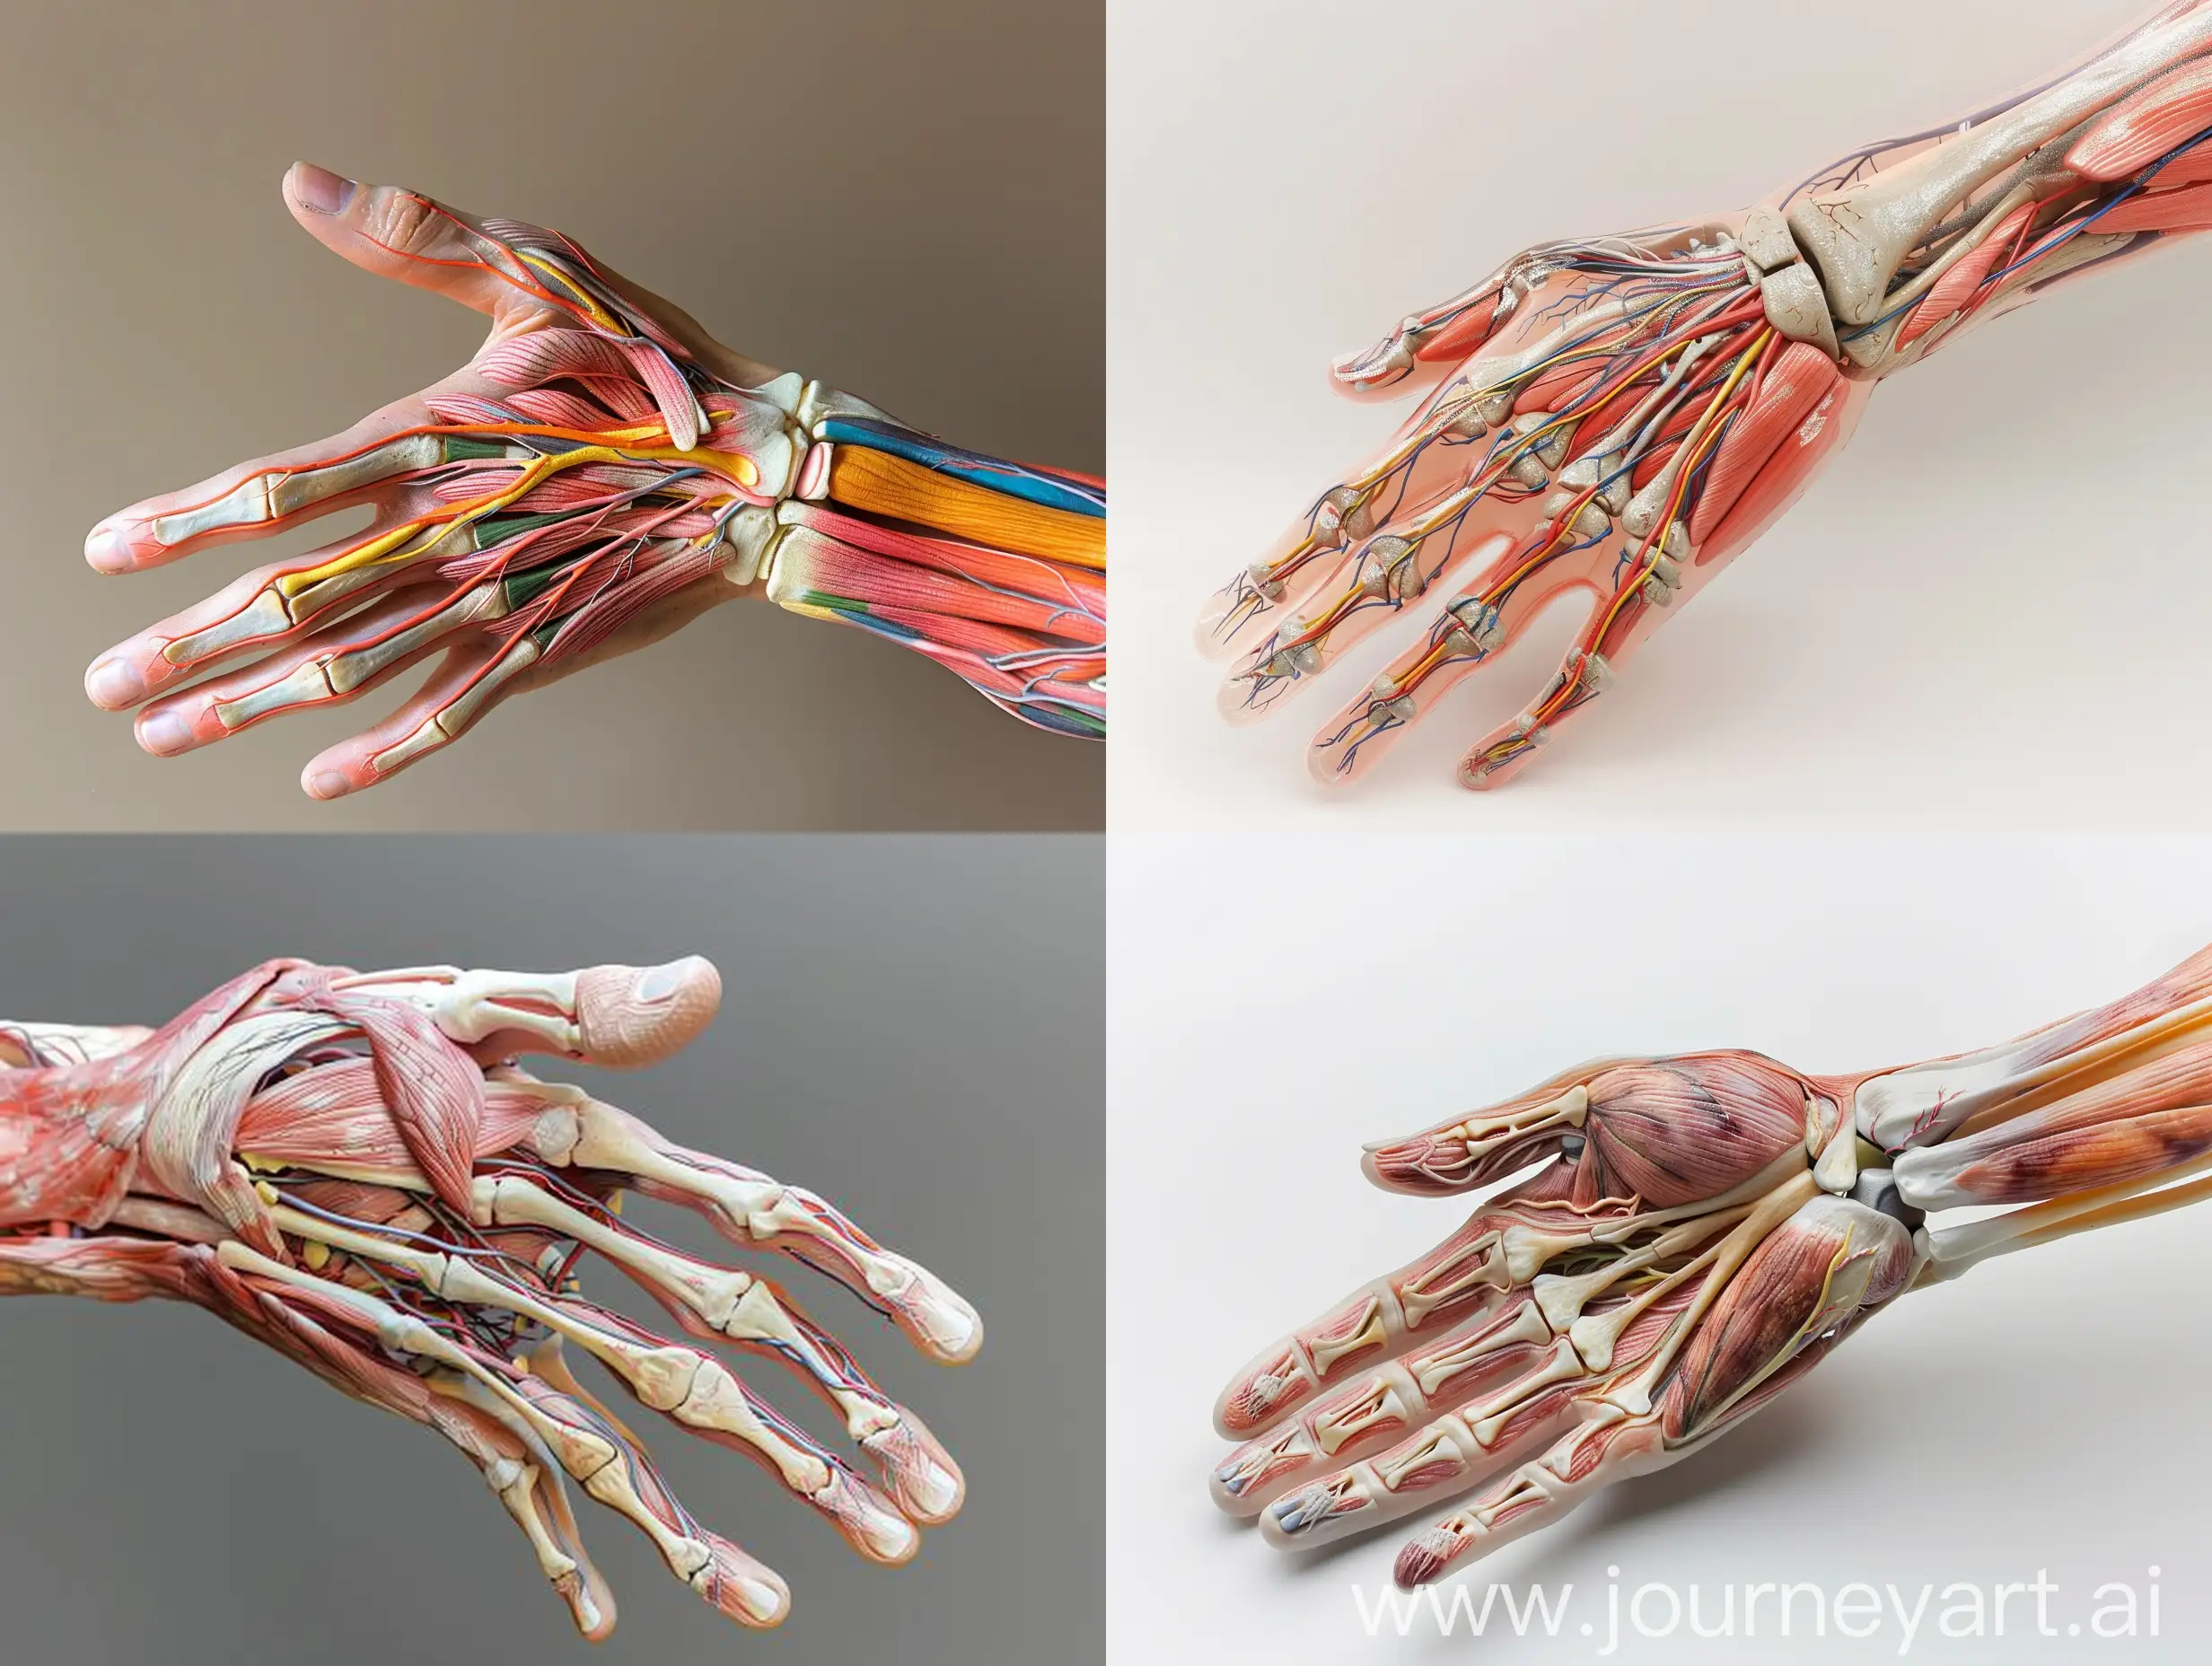 Detailed-Anatomy-Hand-Illustration-Exploration-of-Structure-and-Form